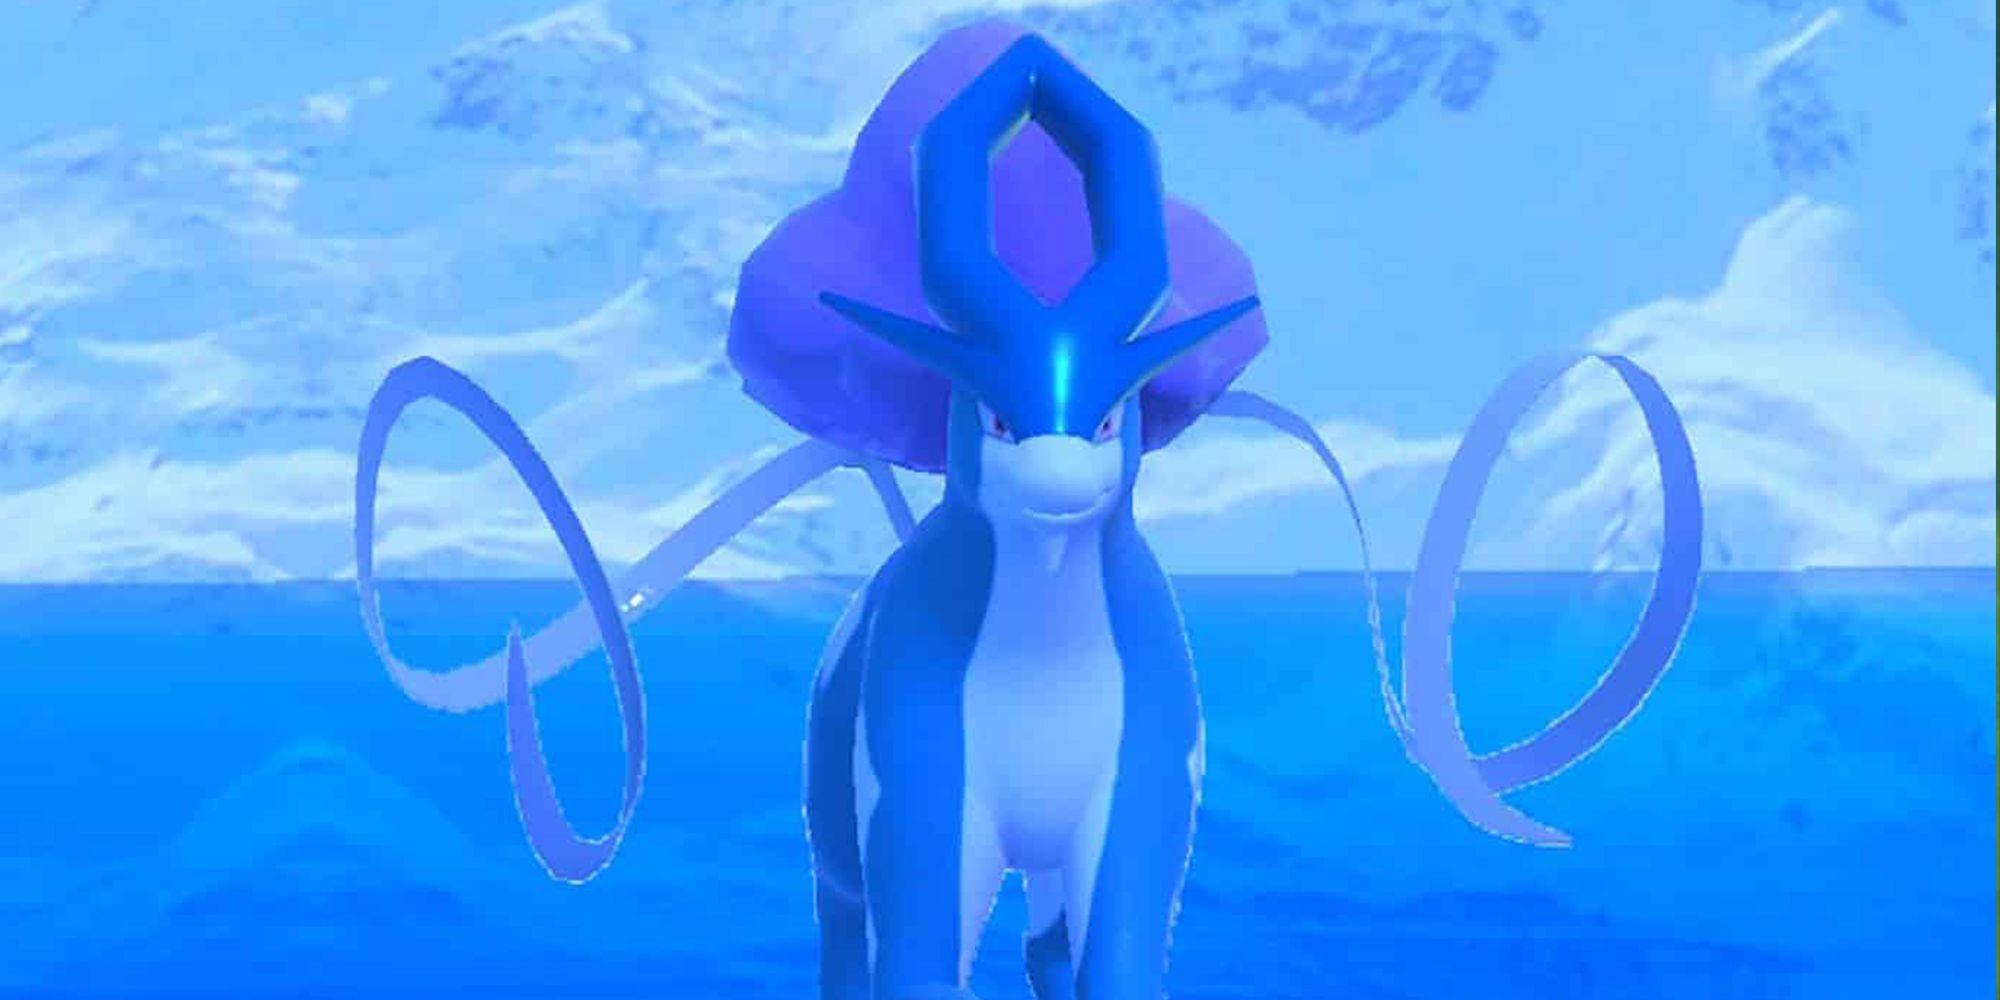 How to Find Legendary Suicune in Pokémon Snap